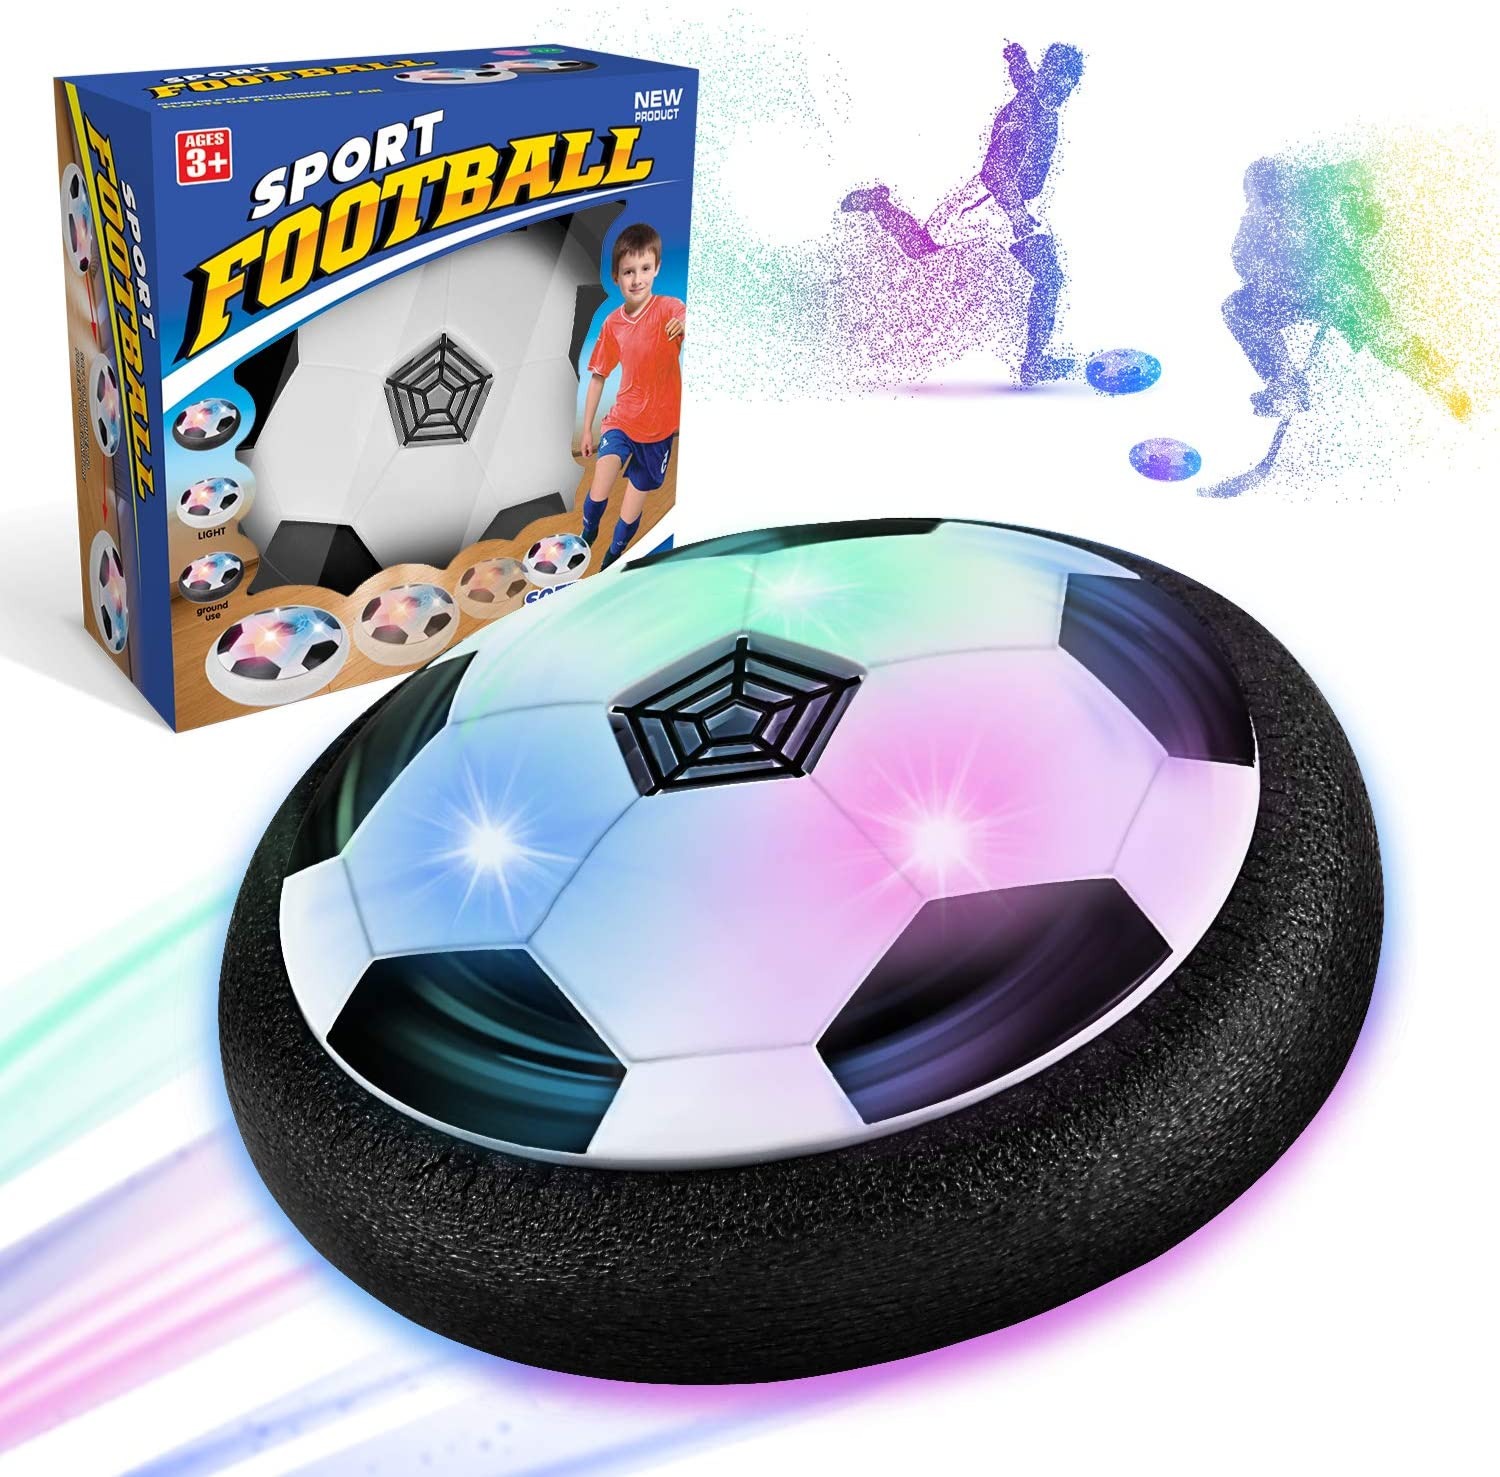 football gifts boys 5 6 10 years - over ball toys from 5-10 years boys with LED light, air hockey children's toys, indoor & outdoor children's games,